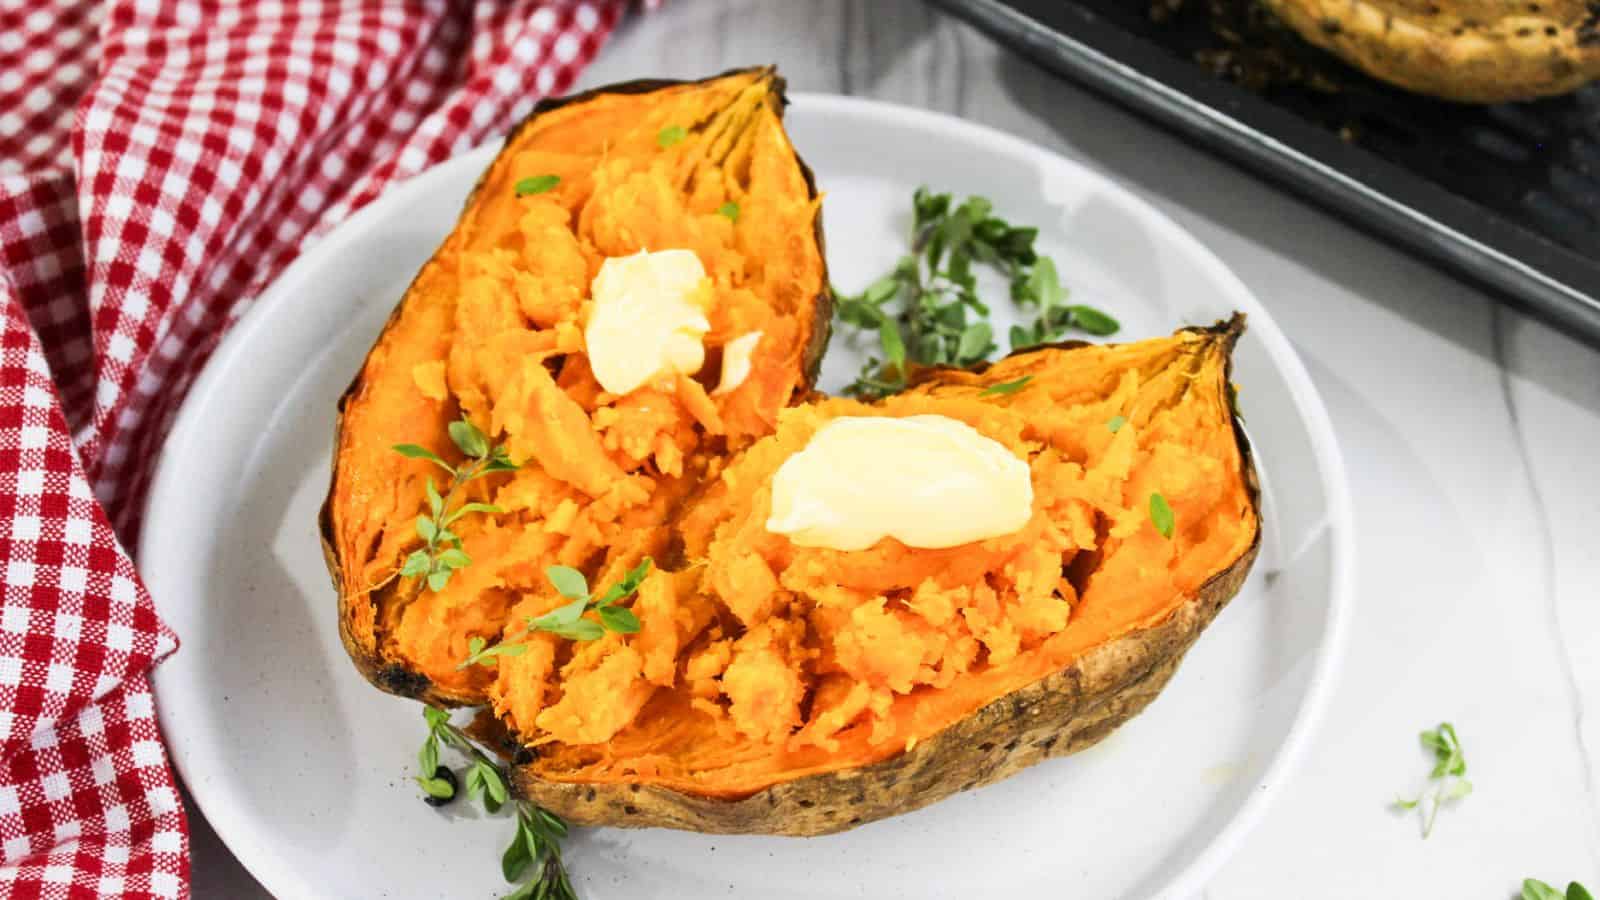 Two halves of baked sweet potato topped with butter and garnished with herbs on a white plate, with a red checkered napkin on the side.